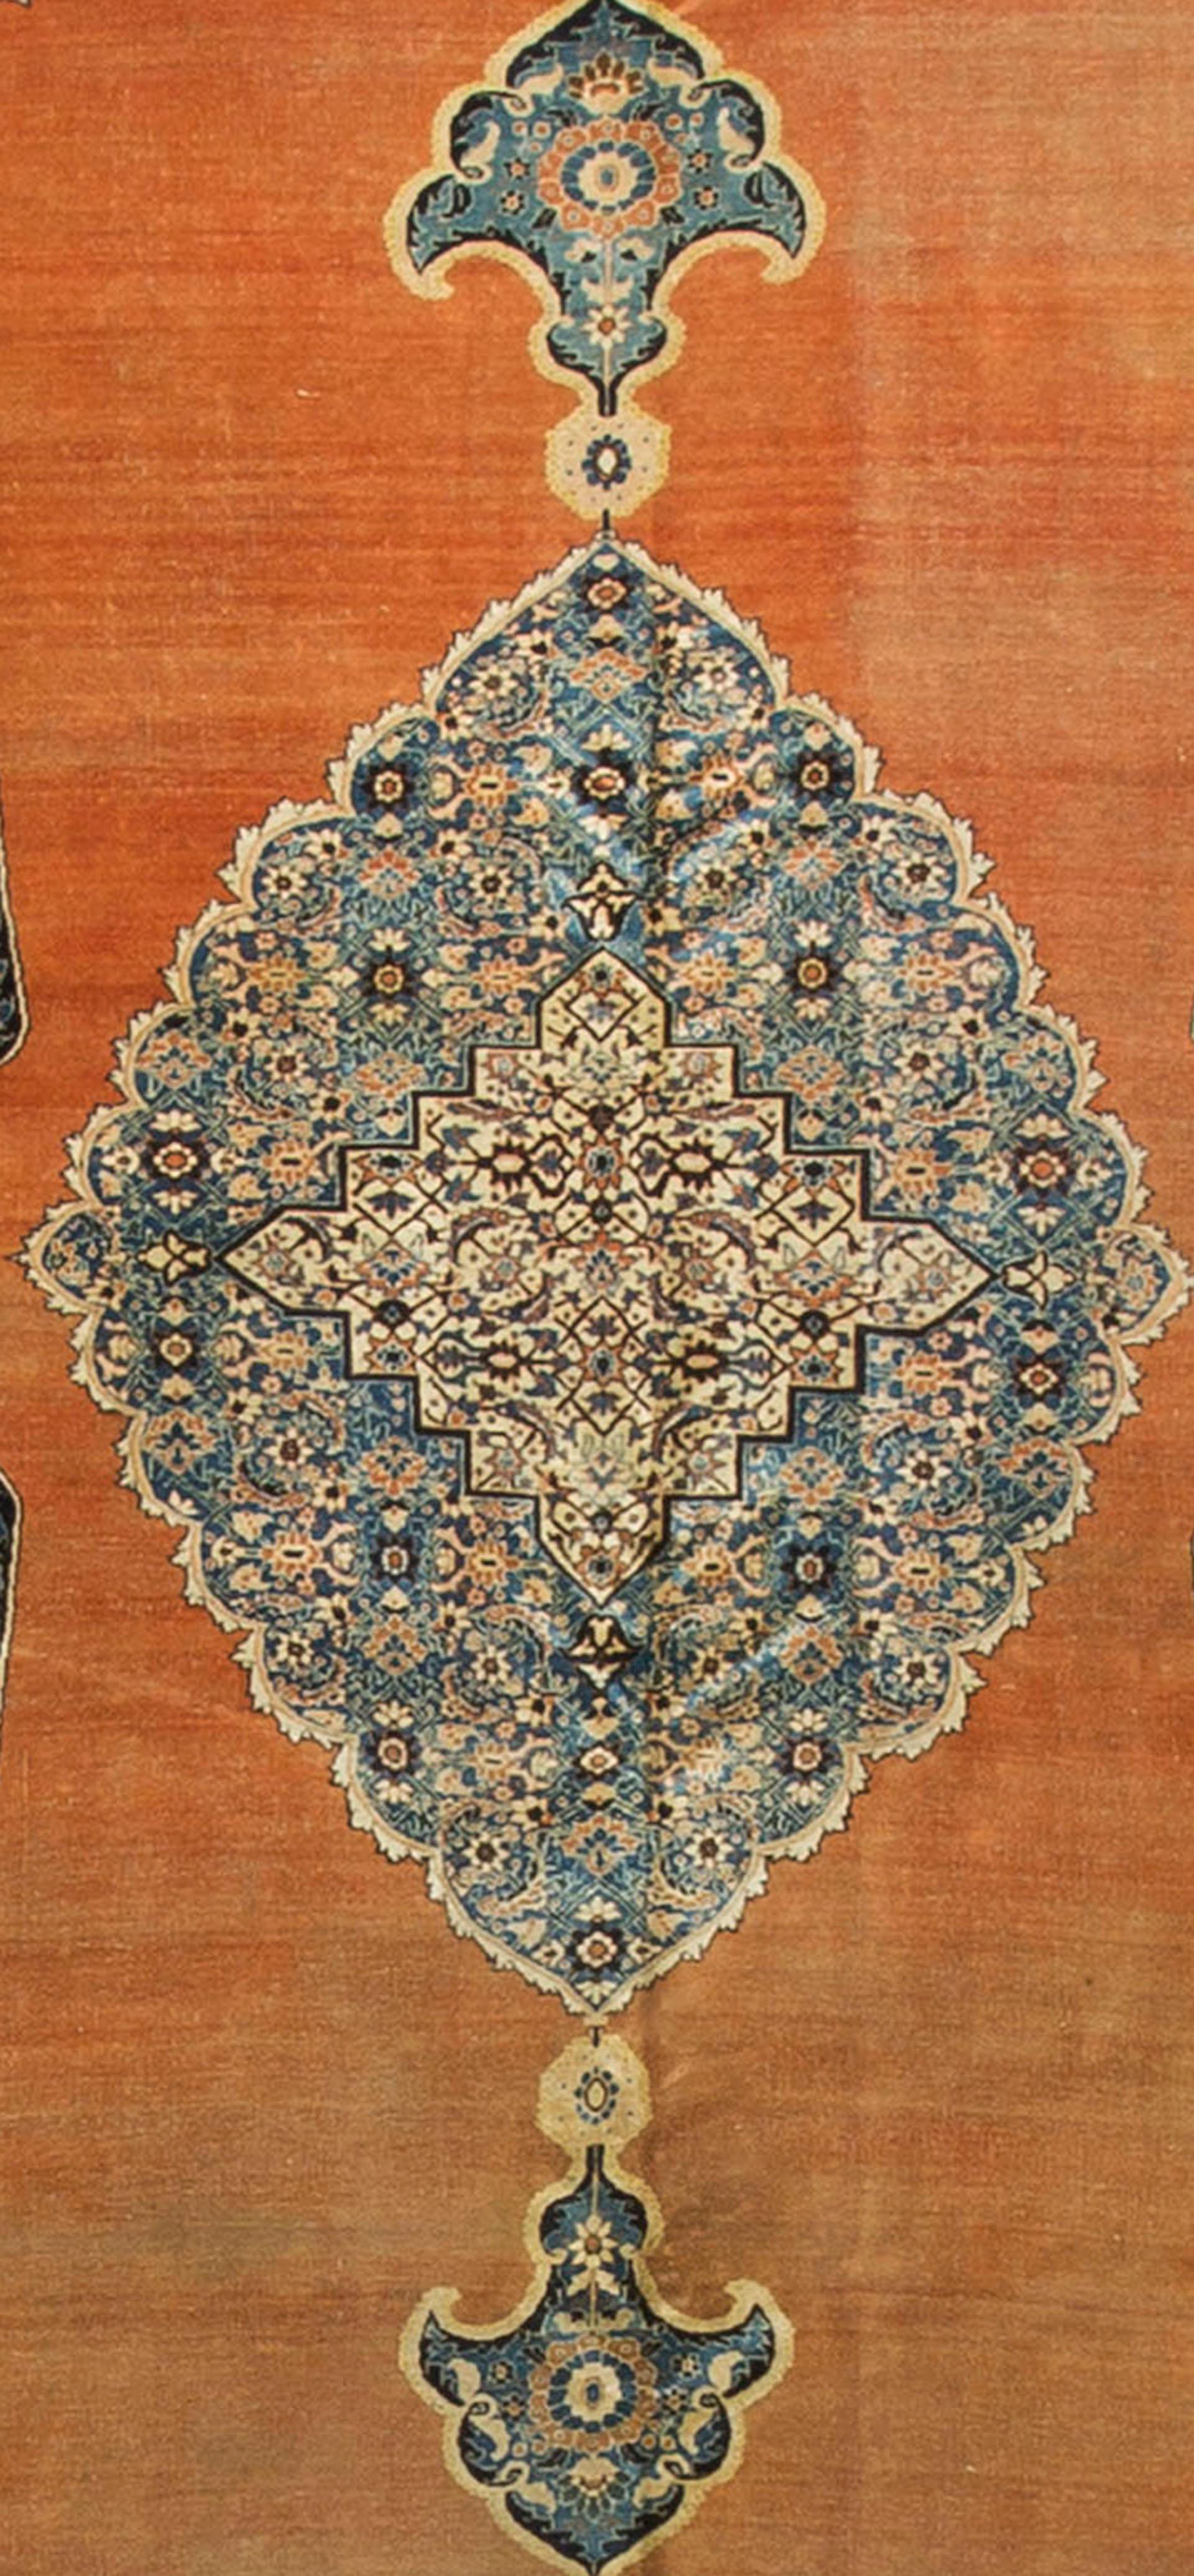 Antique Persian Haji-Jalili Tabriz rug carpet, circa 1890. Hadji Jalili style Tabriz carpets are all antique, woven between 1880 and 1910. The pile is velvety, but firm and resilient, the color palettes are slightly mellow, but complex, and the